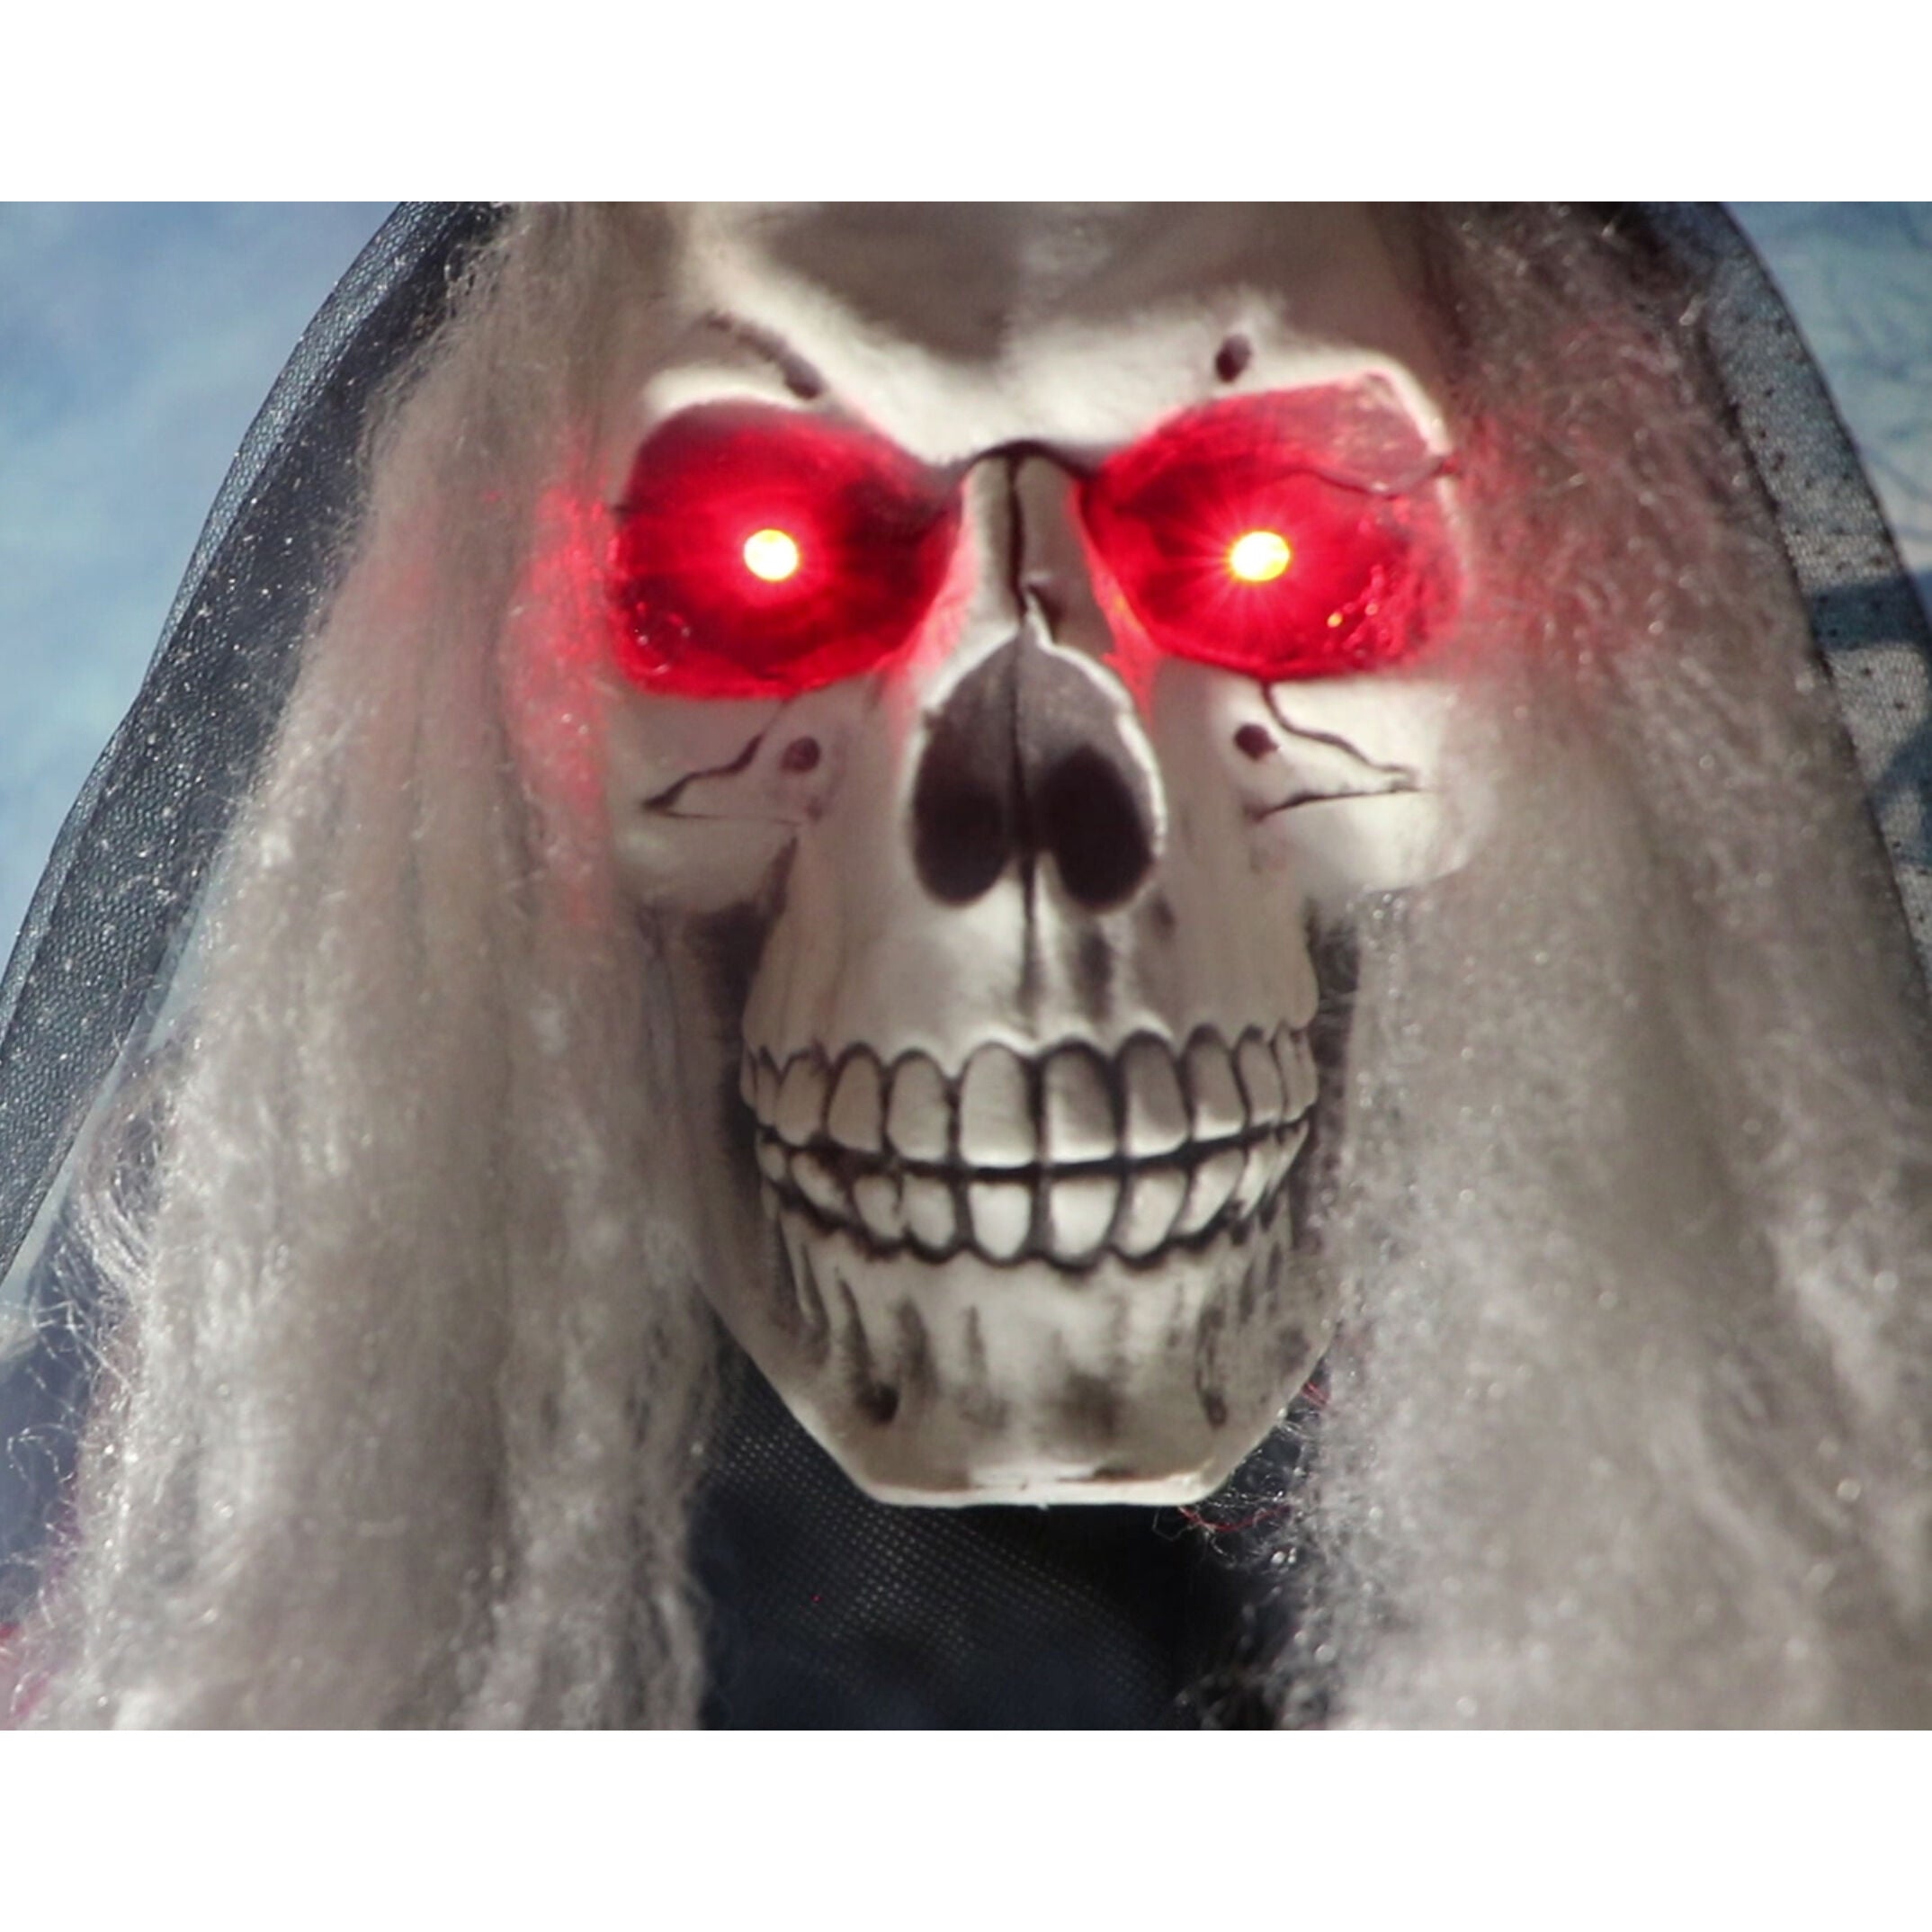 Haunted Hill Farm -  65-In. Mona the Moaning Skeleton Bride, Indoor or Covered Outdoor Halloween Decoration, Red LED Eyes